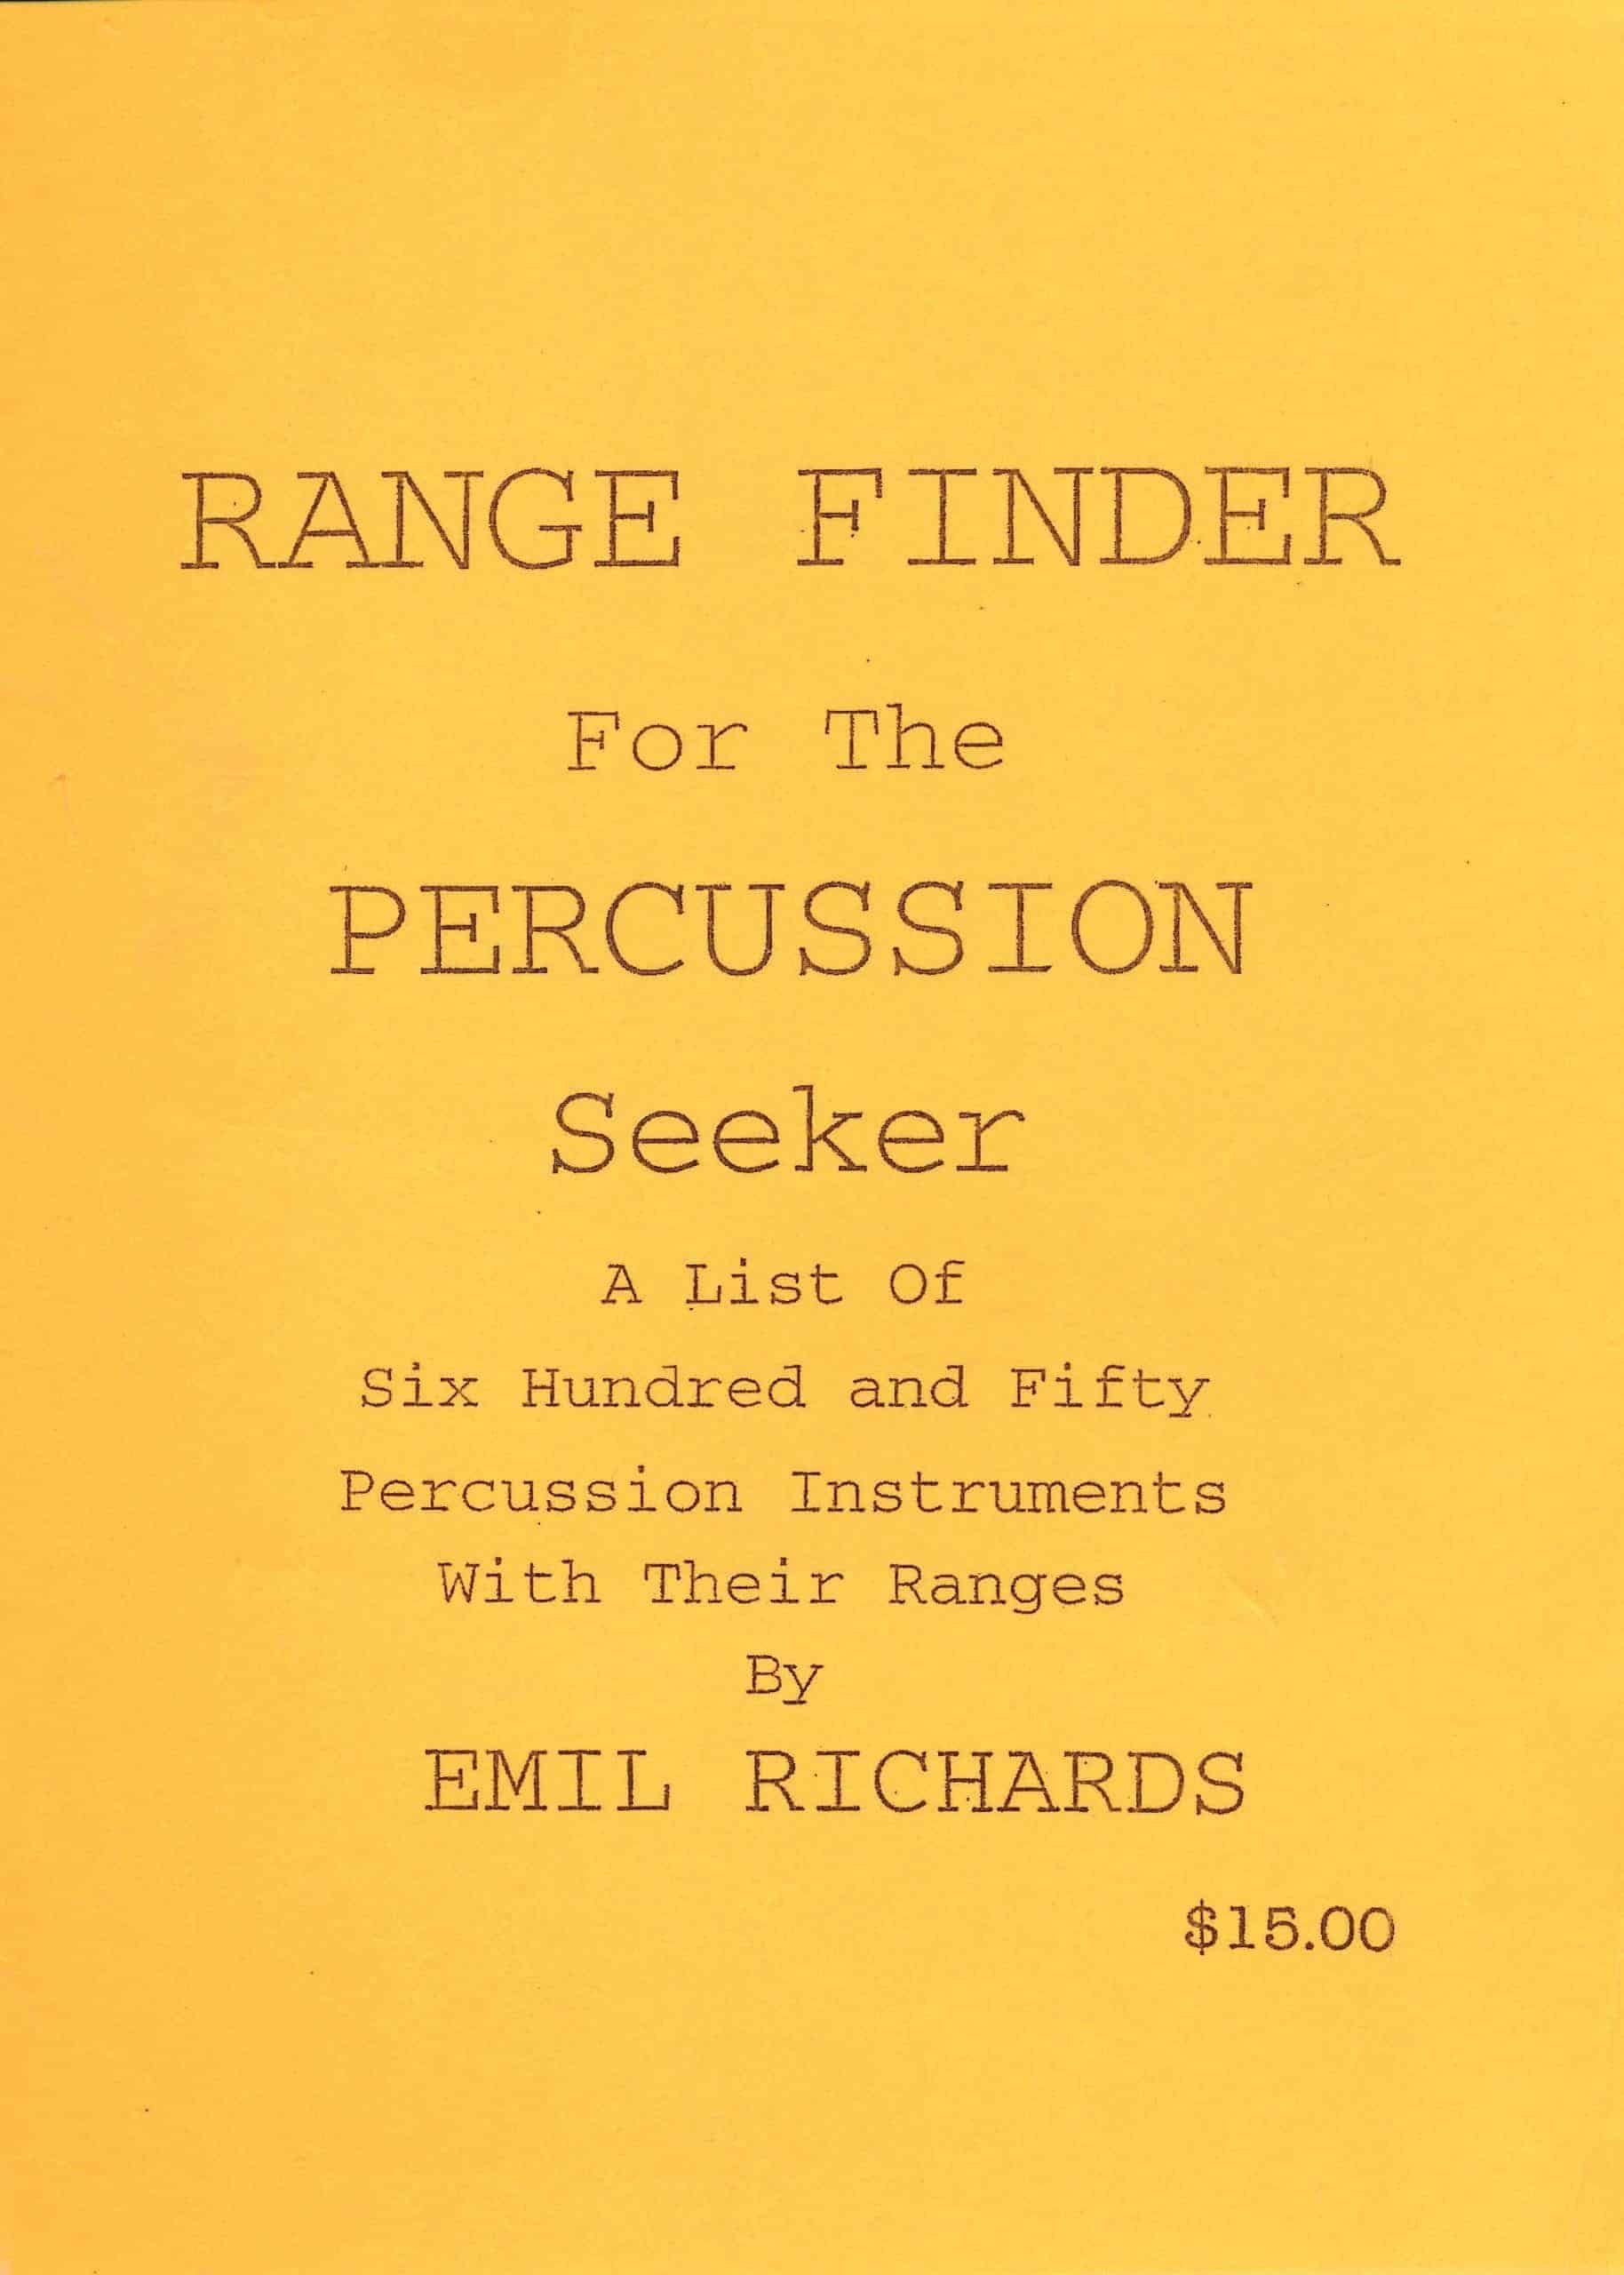 Range Finder For The Percussion Seeker by Emil Richards